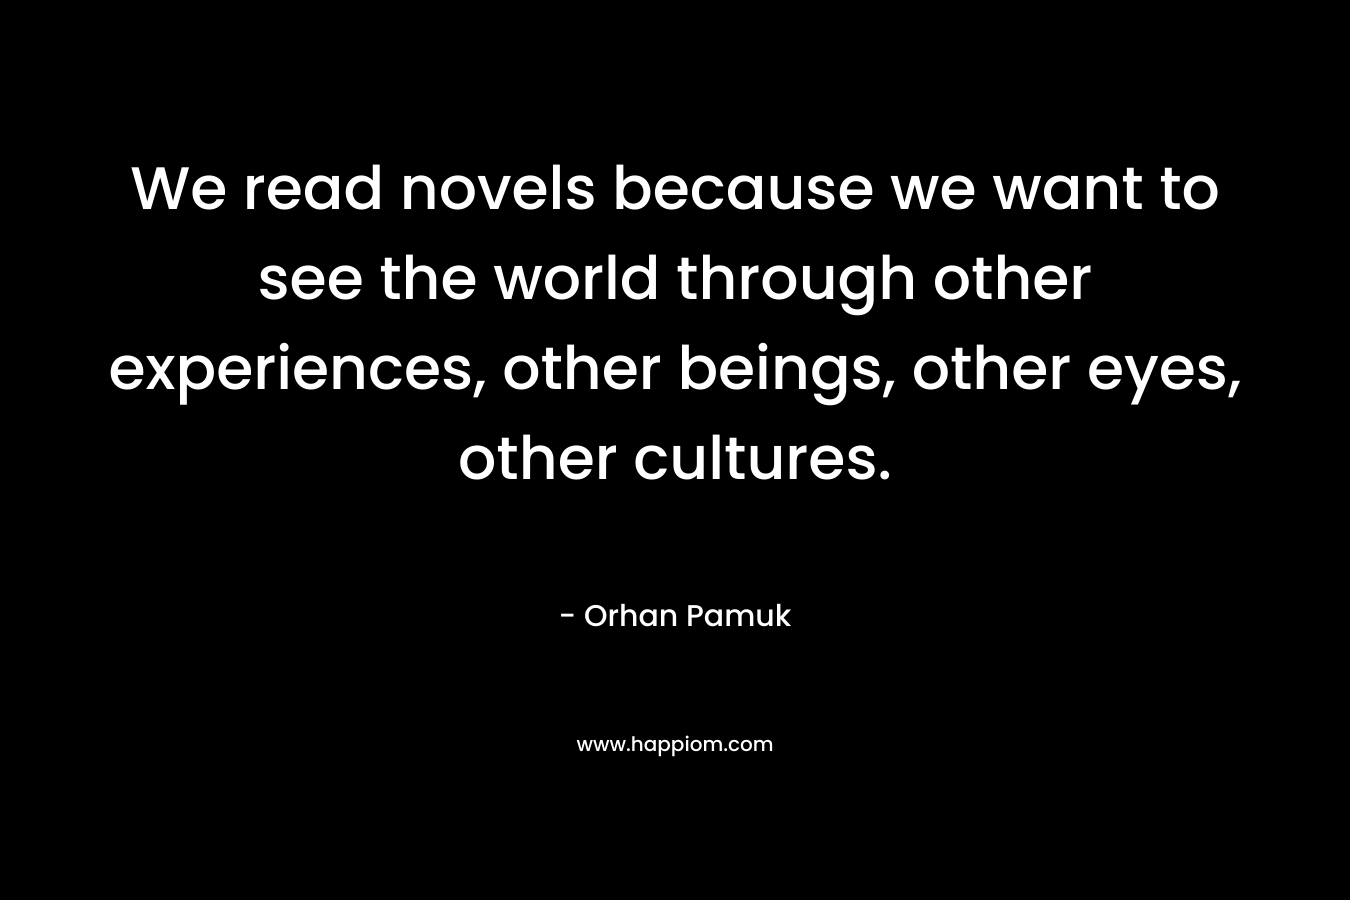 We read novels because we want to see the world through other experiences, other beings, other eyes, other cultures.